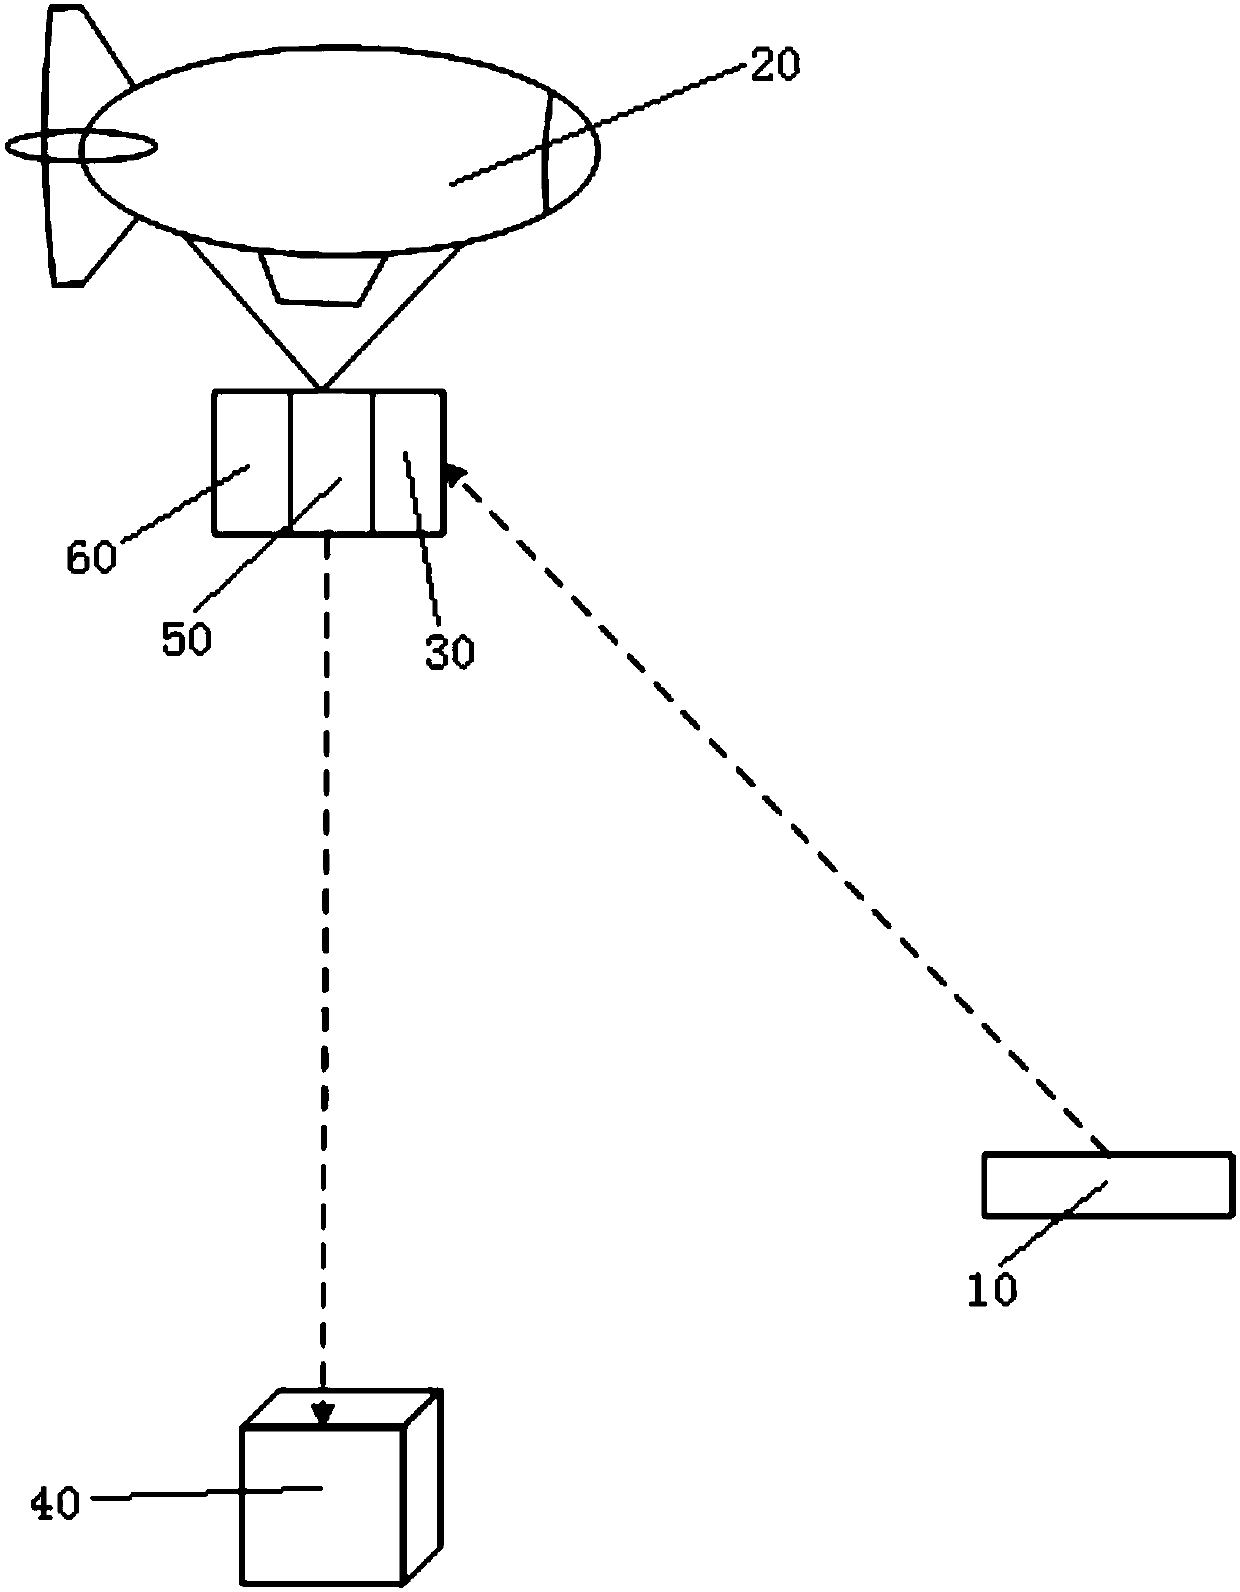 Telemetry receiving and processing system based on high-altitude mooring object platform